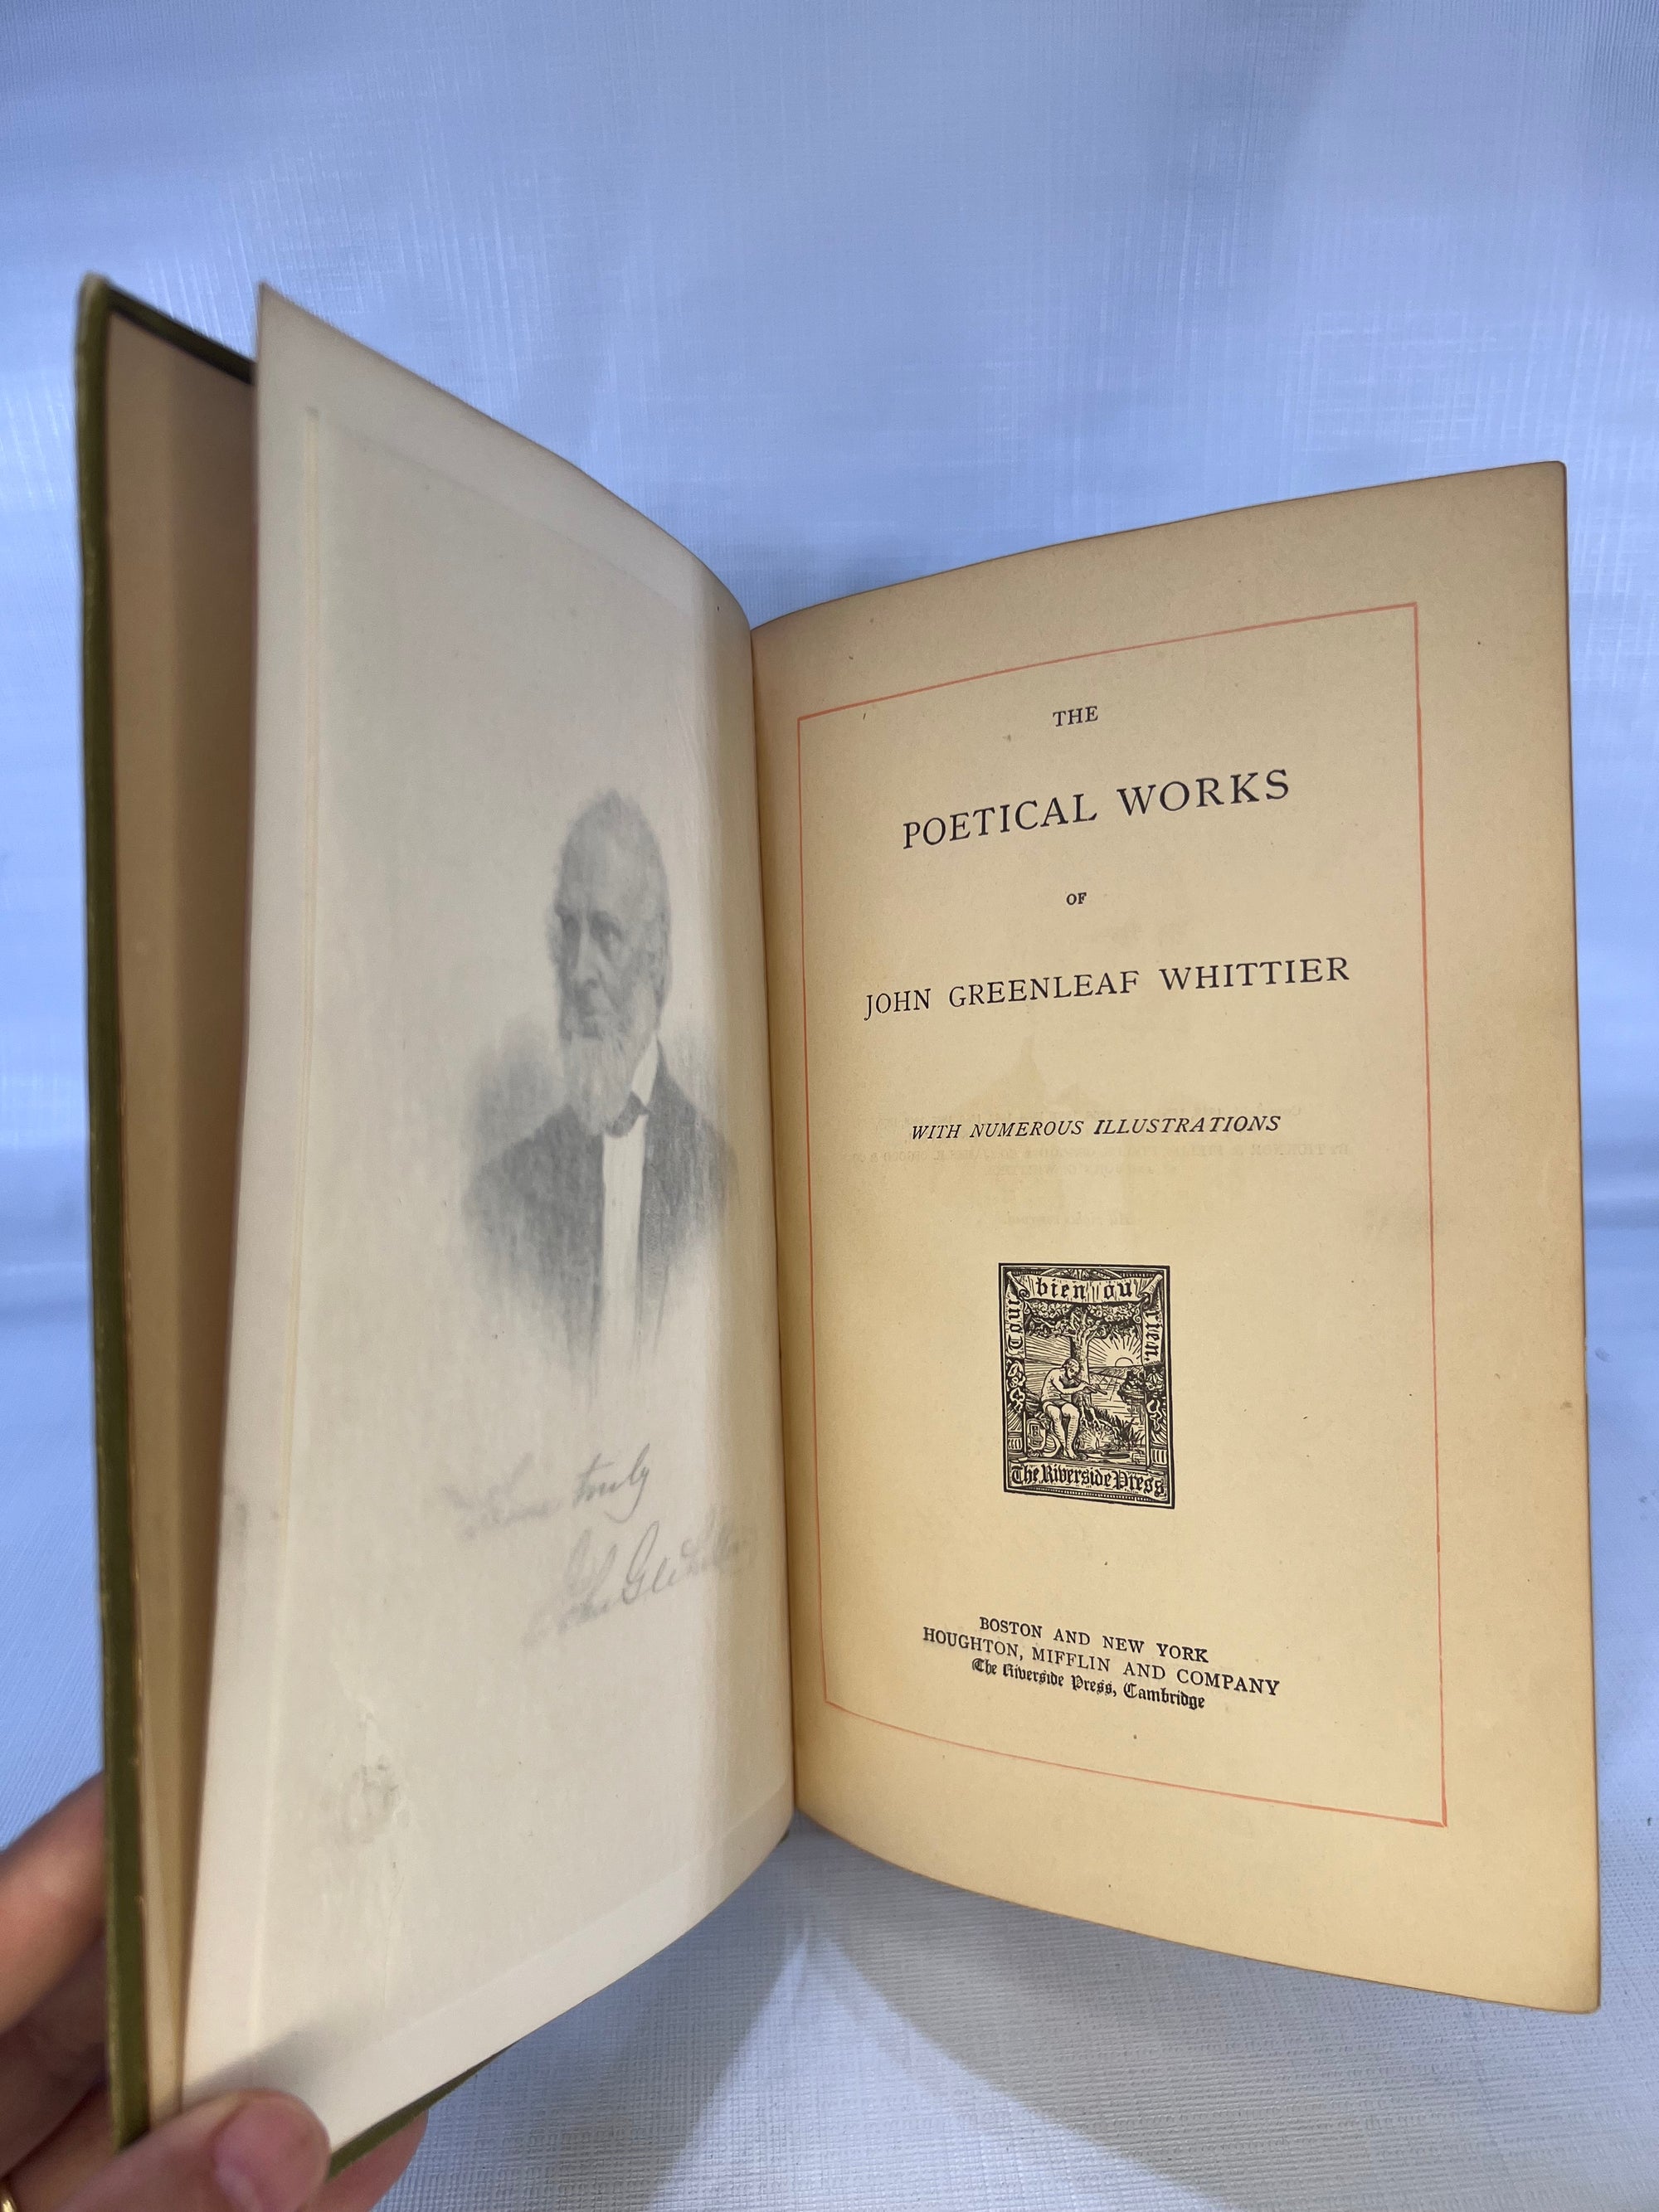 The Poetical Works of John Greenleaf Whittier with Numerous Illustrations 1891 The Riverside Press